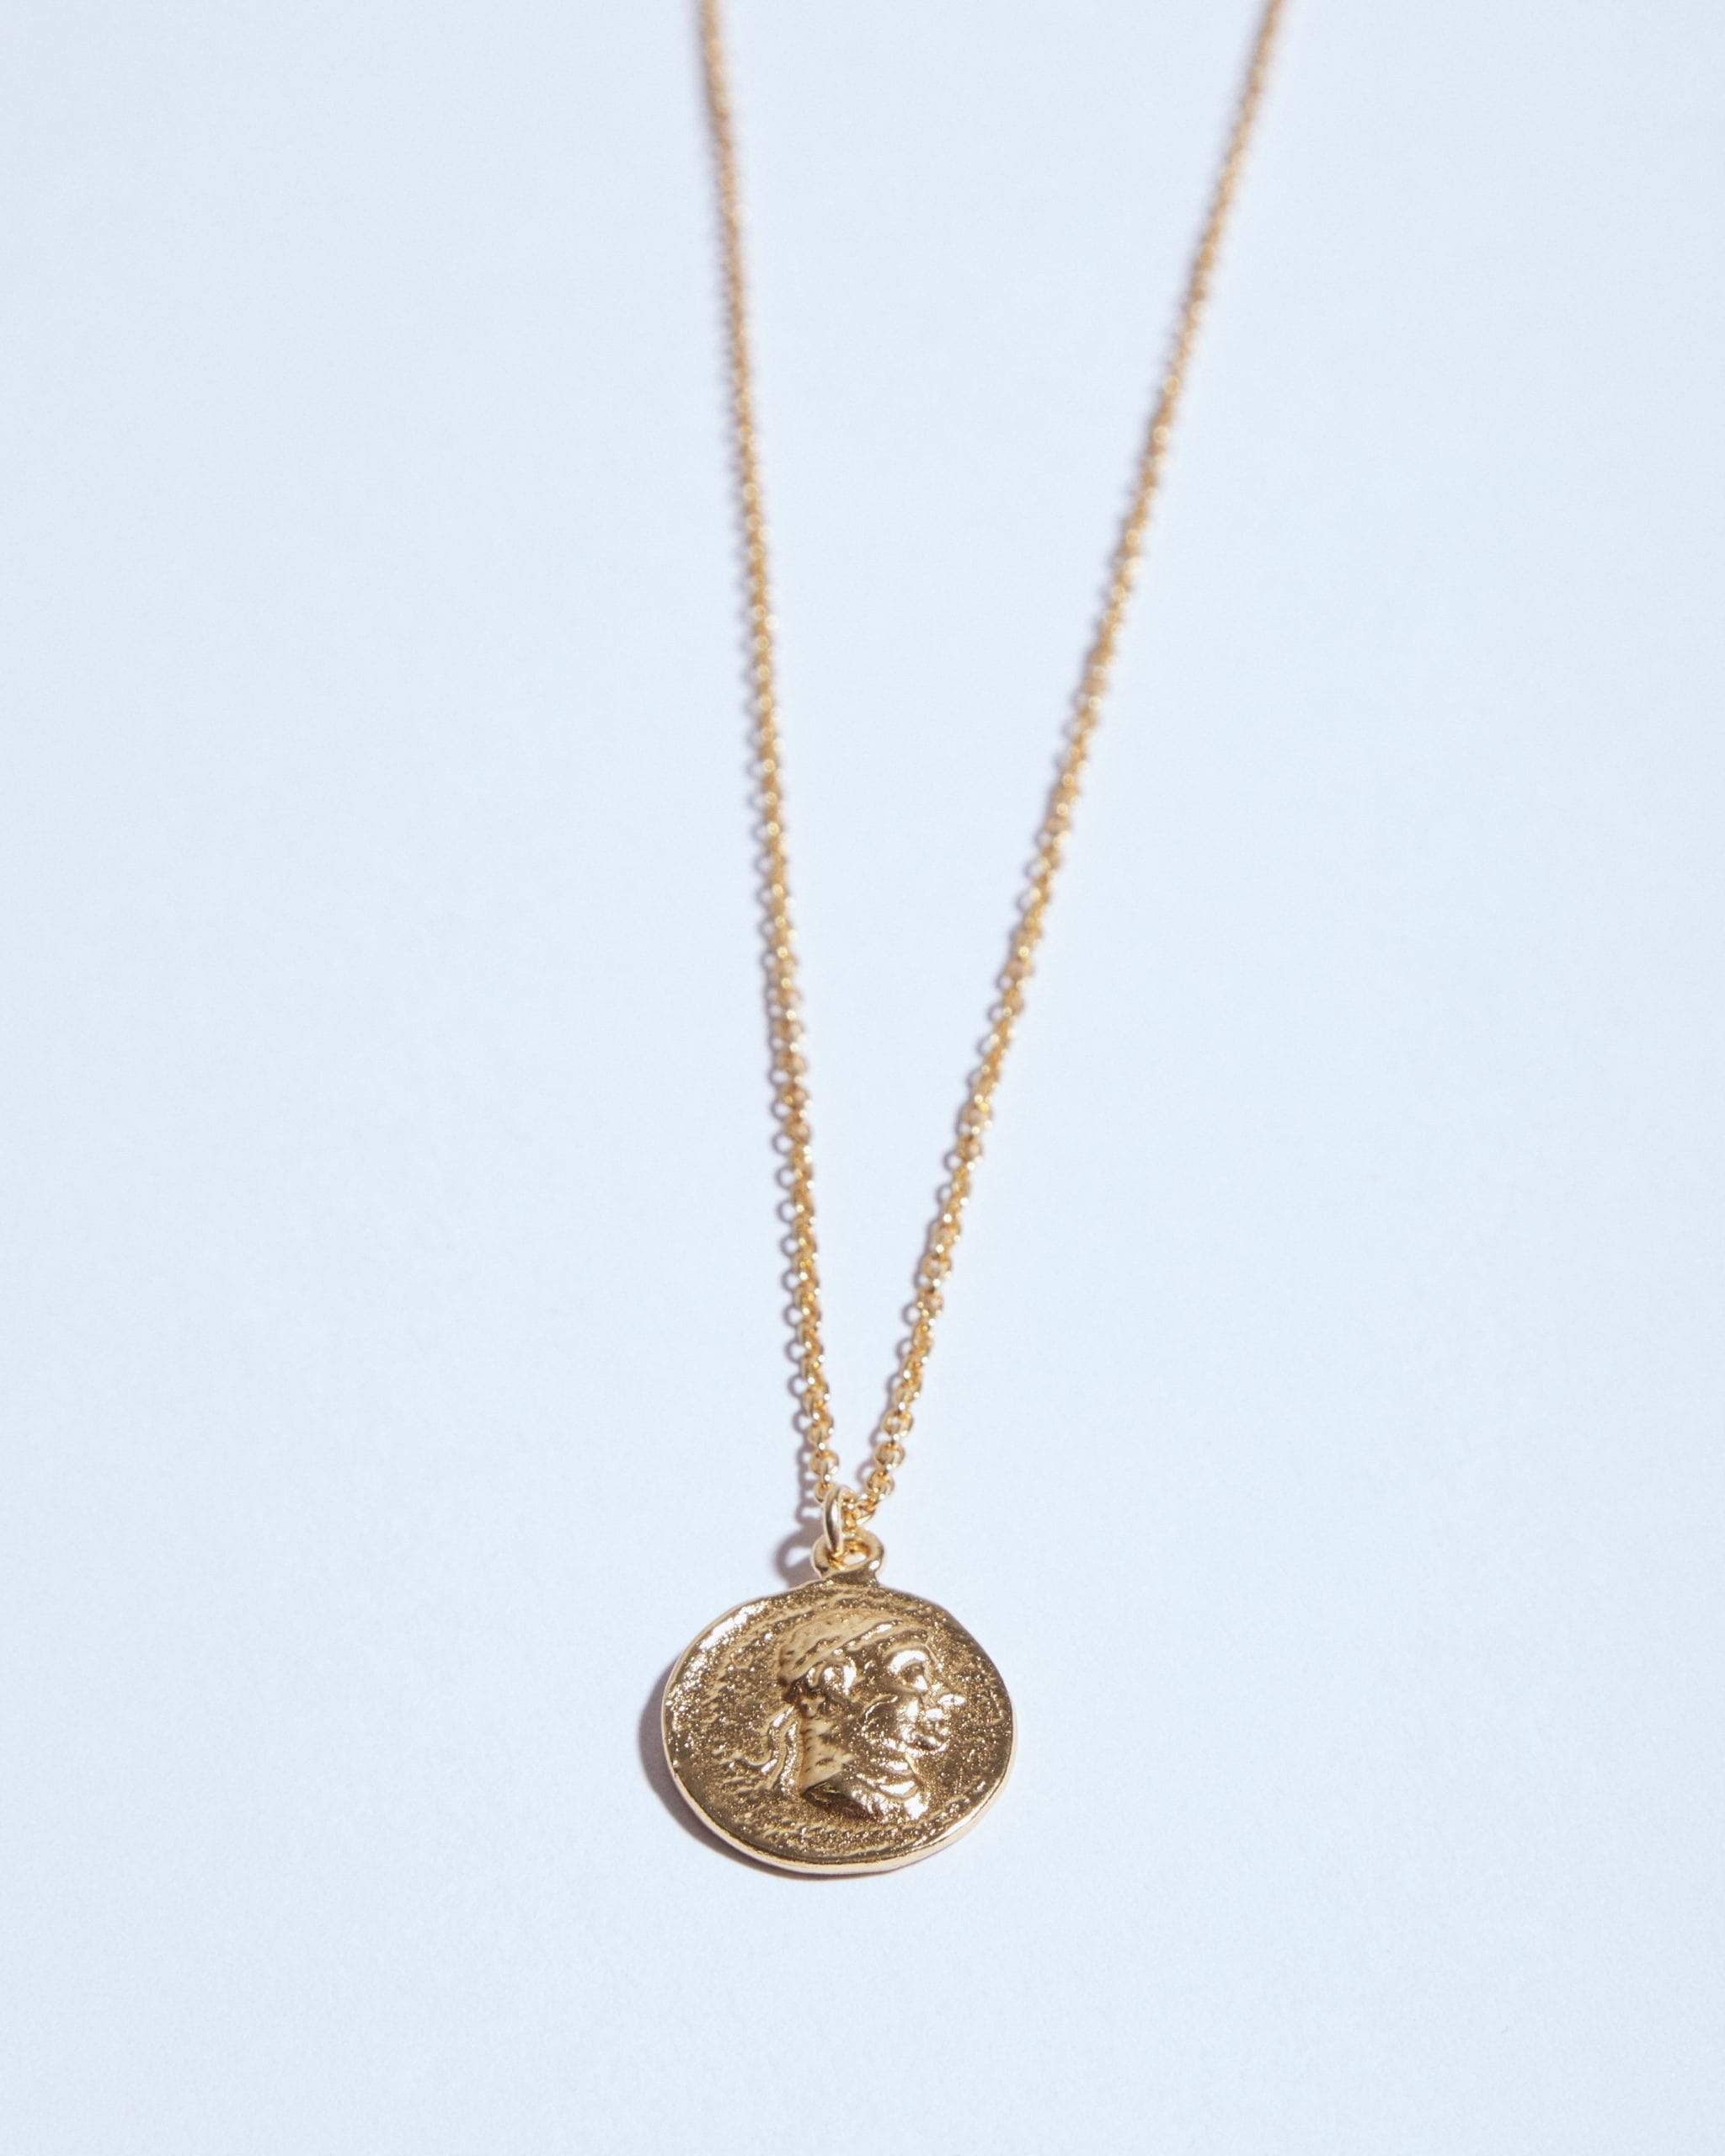 Styling Tips for Men's Gold Necklaces